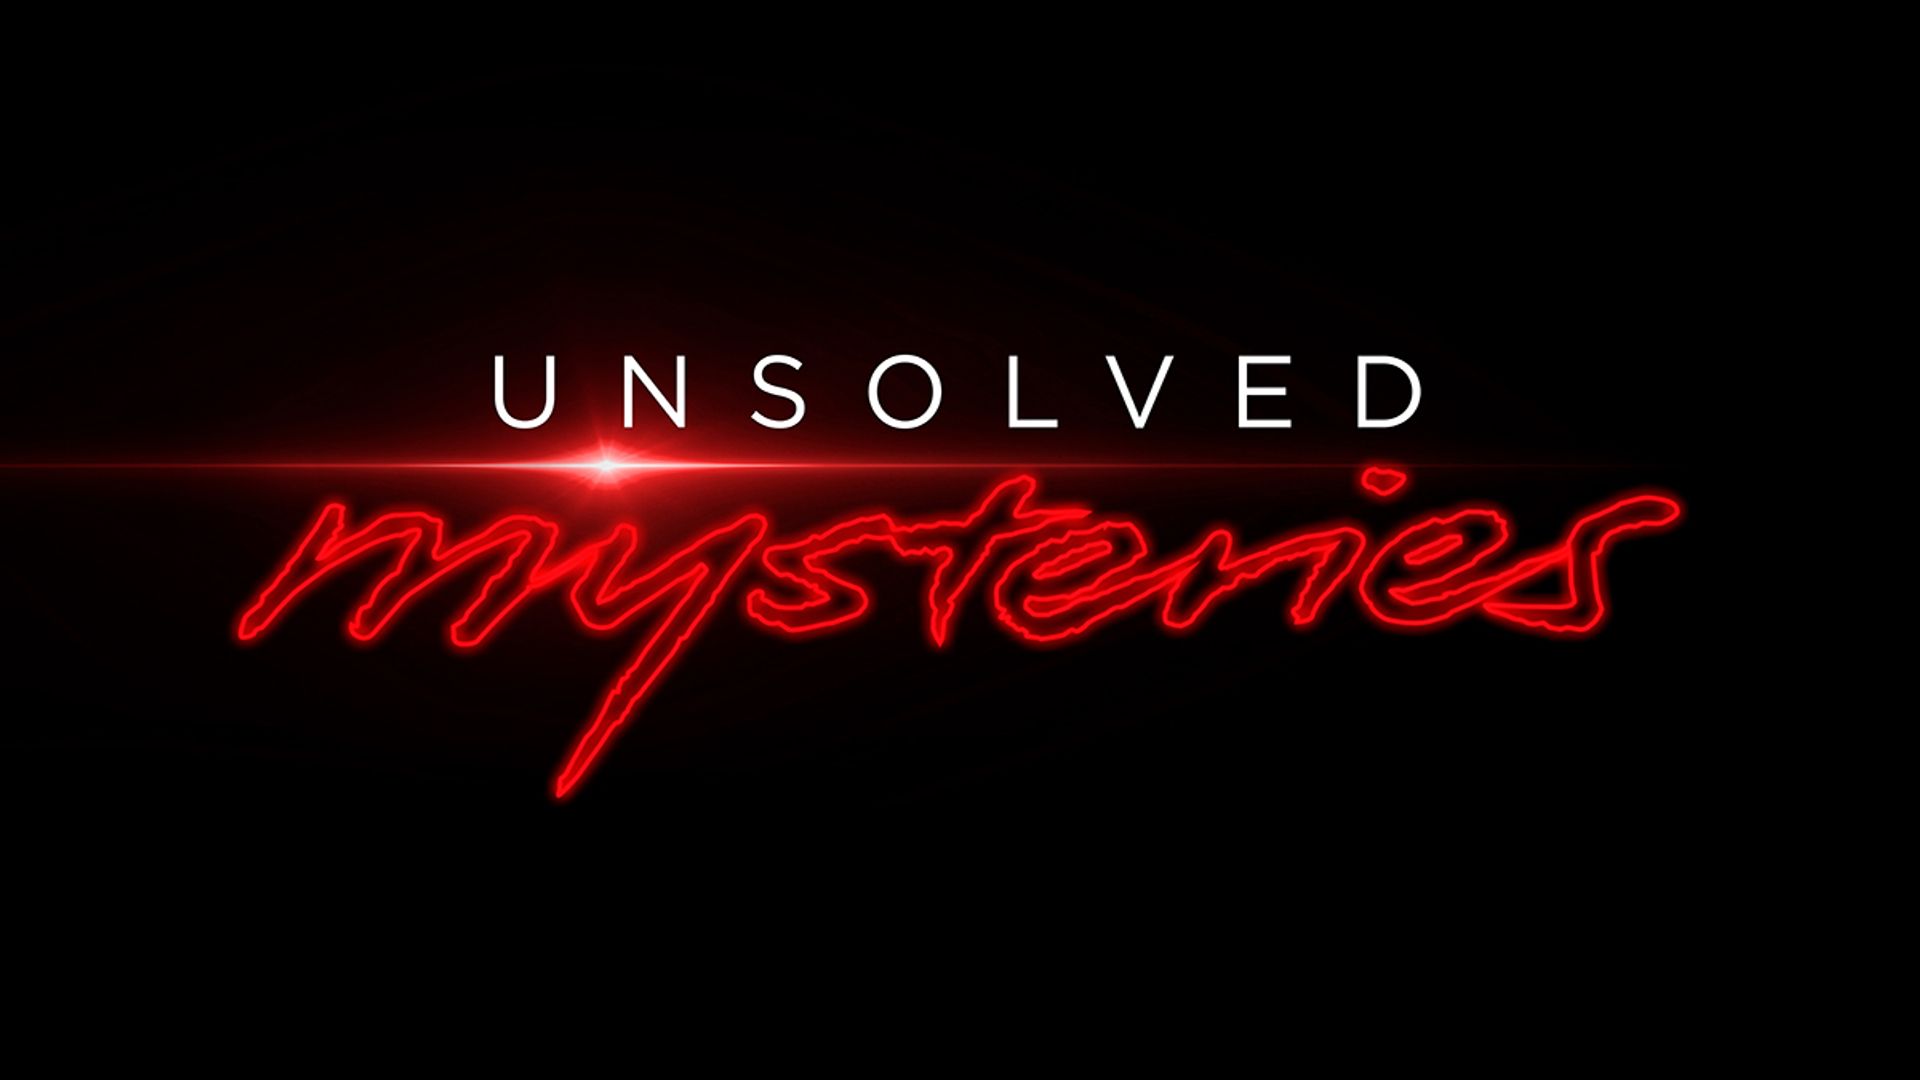 Unsolved Mysteries Netflix announce six brand new episodes of true